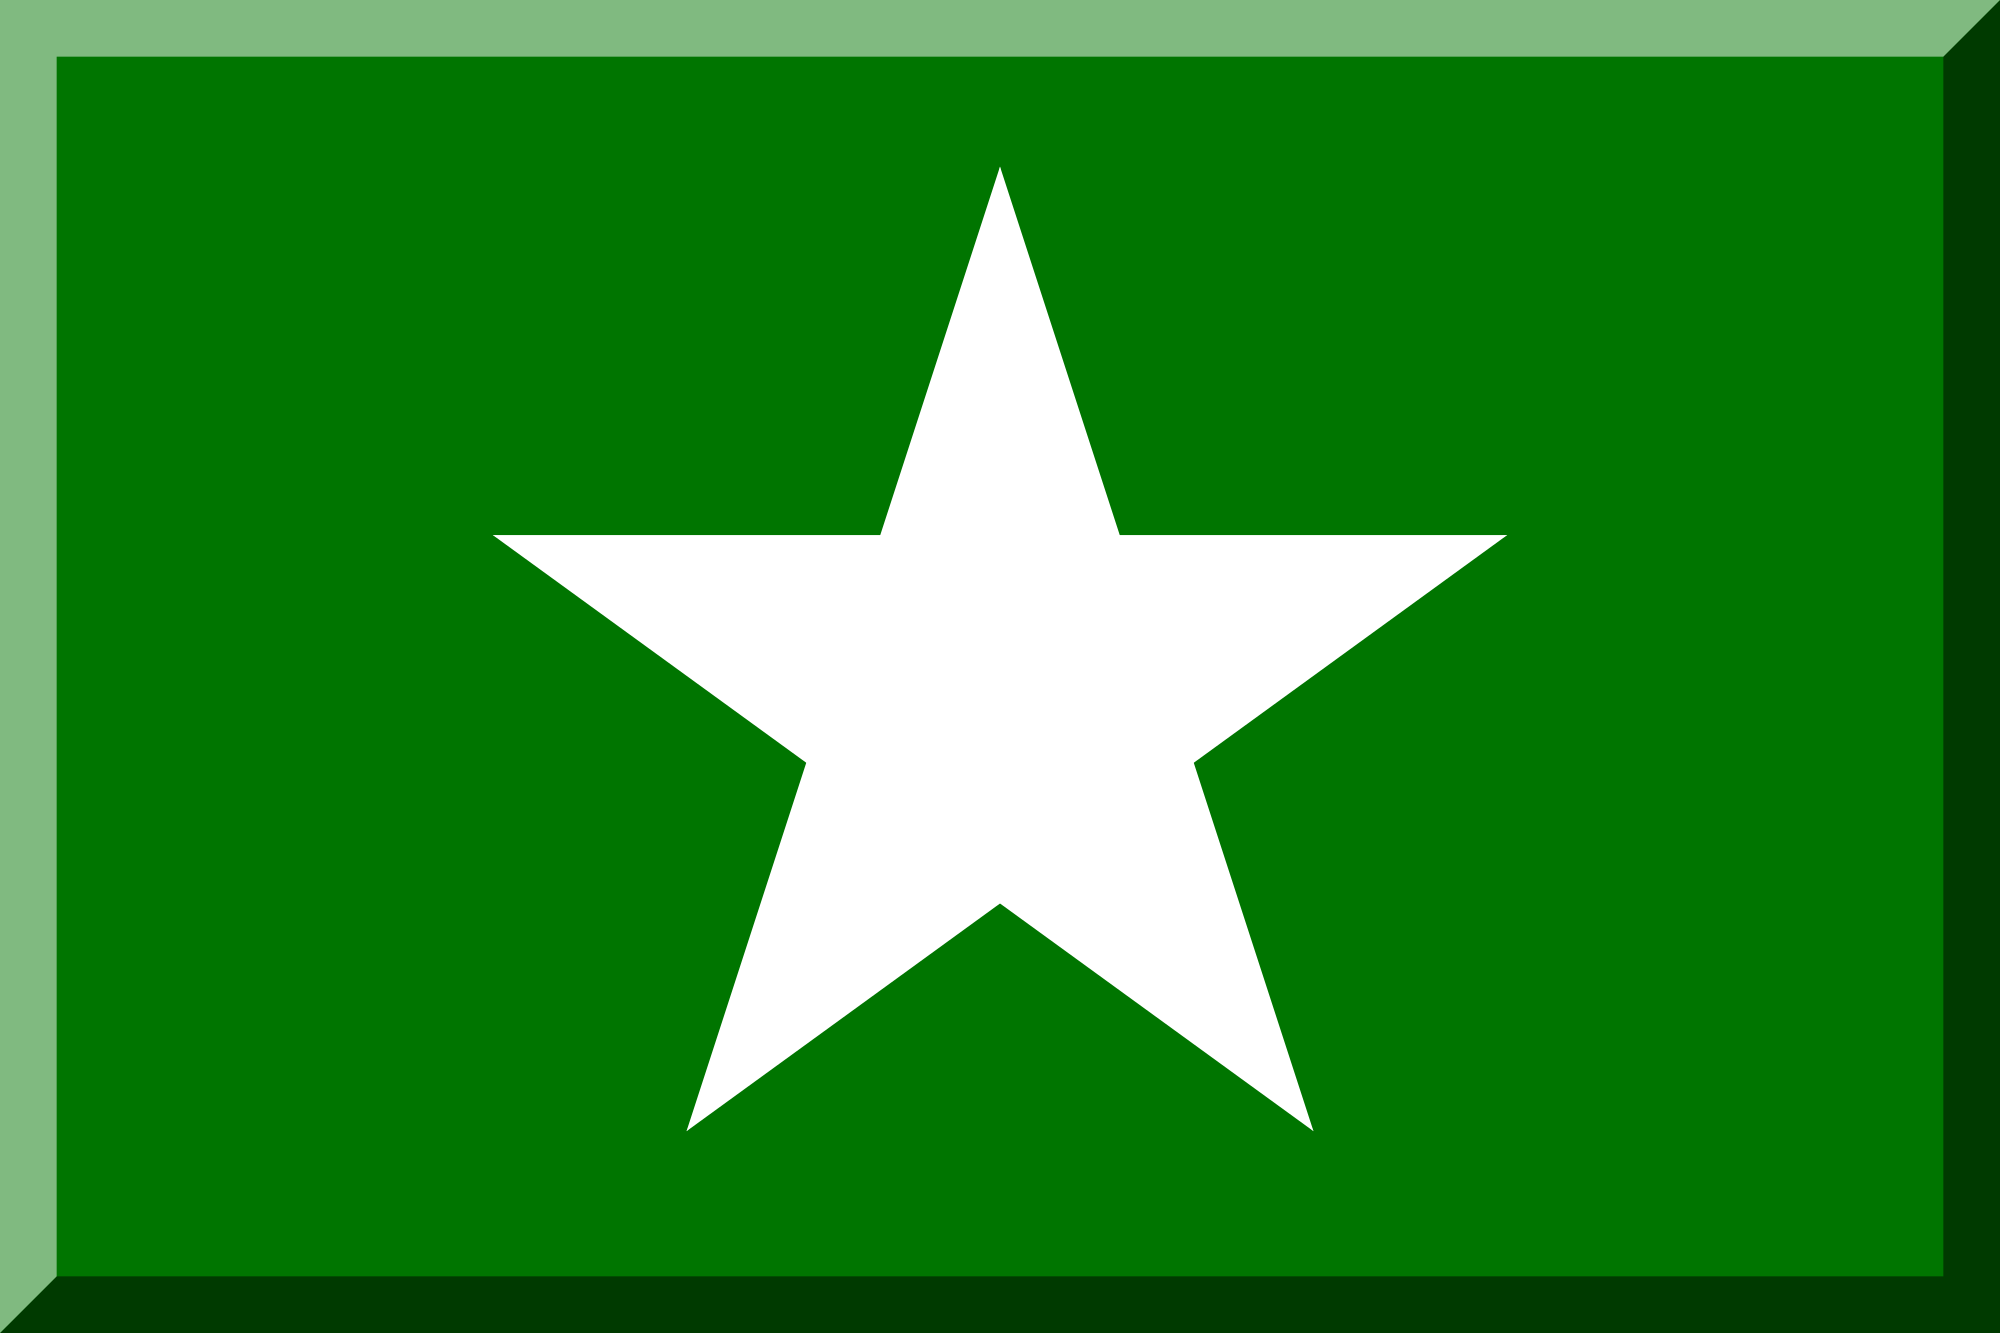 White and Green Star Logo - File:Green rectangle with white star.svg - Wikimedia Commons